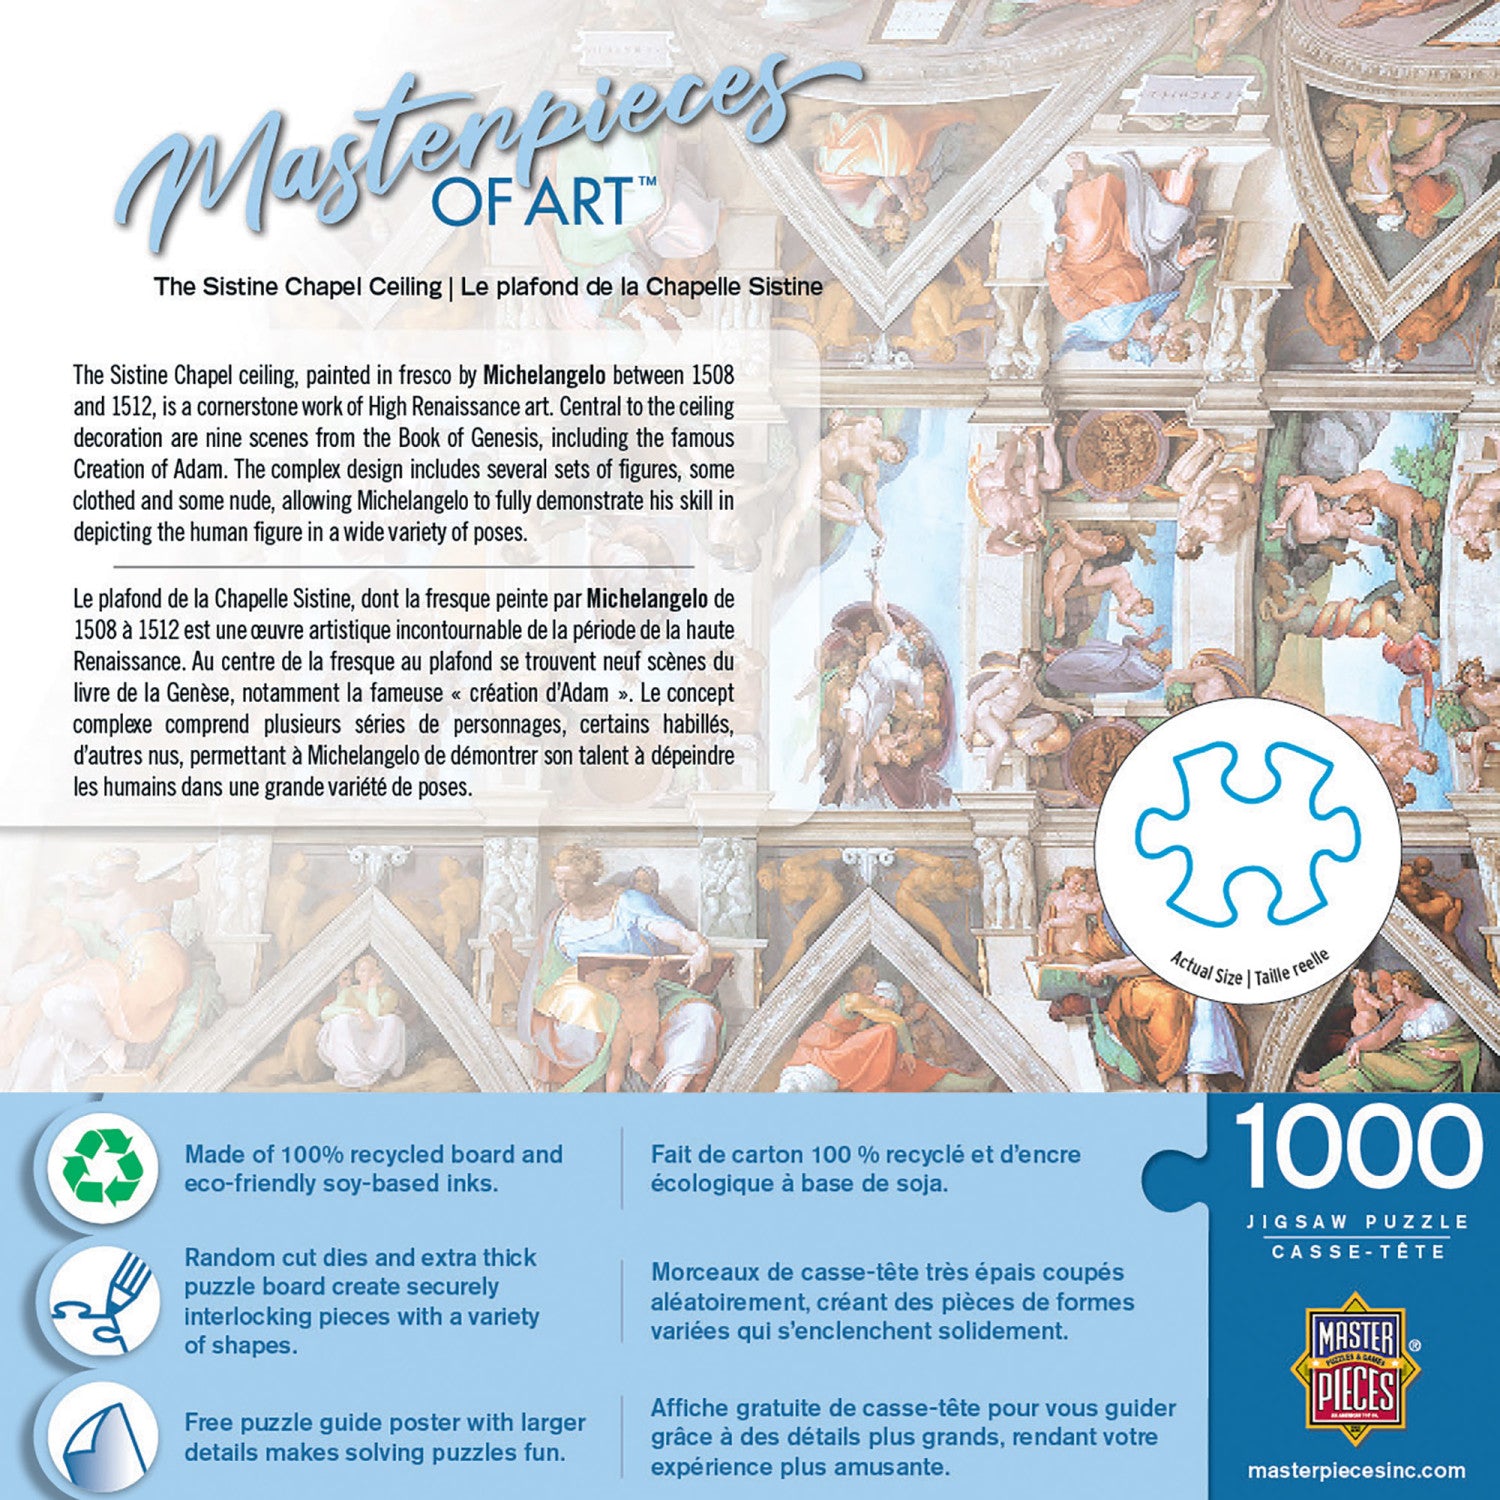 Masterpieces of Art - The Sistine Chapel Ceiling 1000 Piece Puzzle